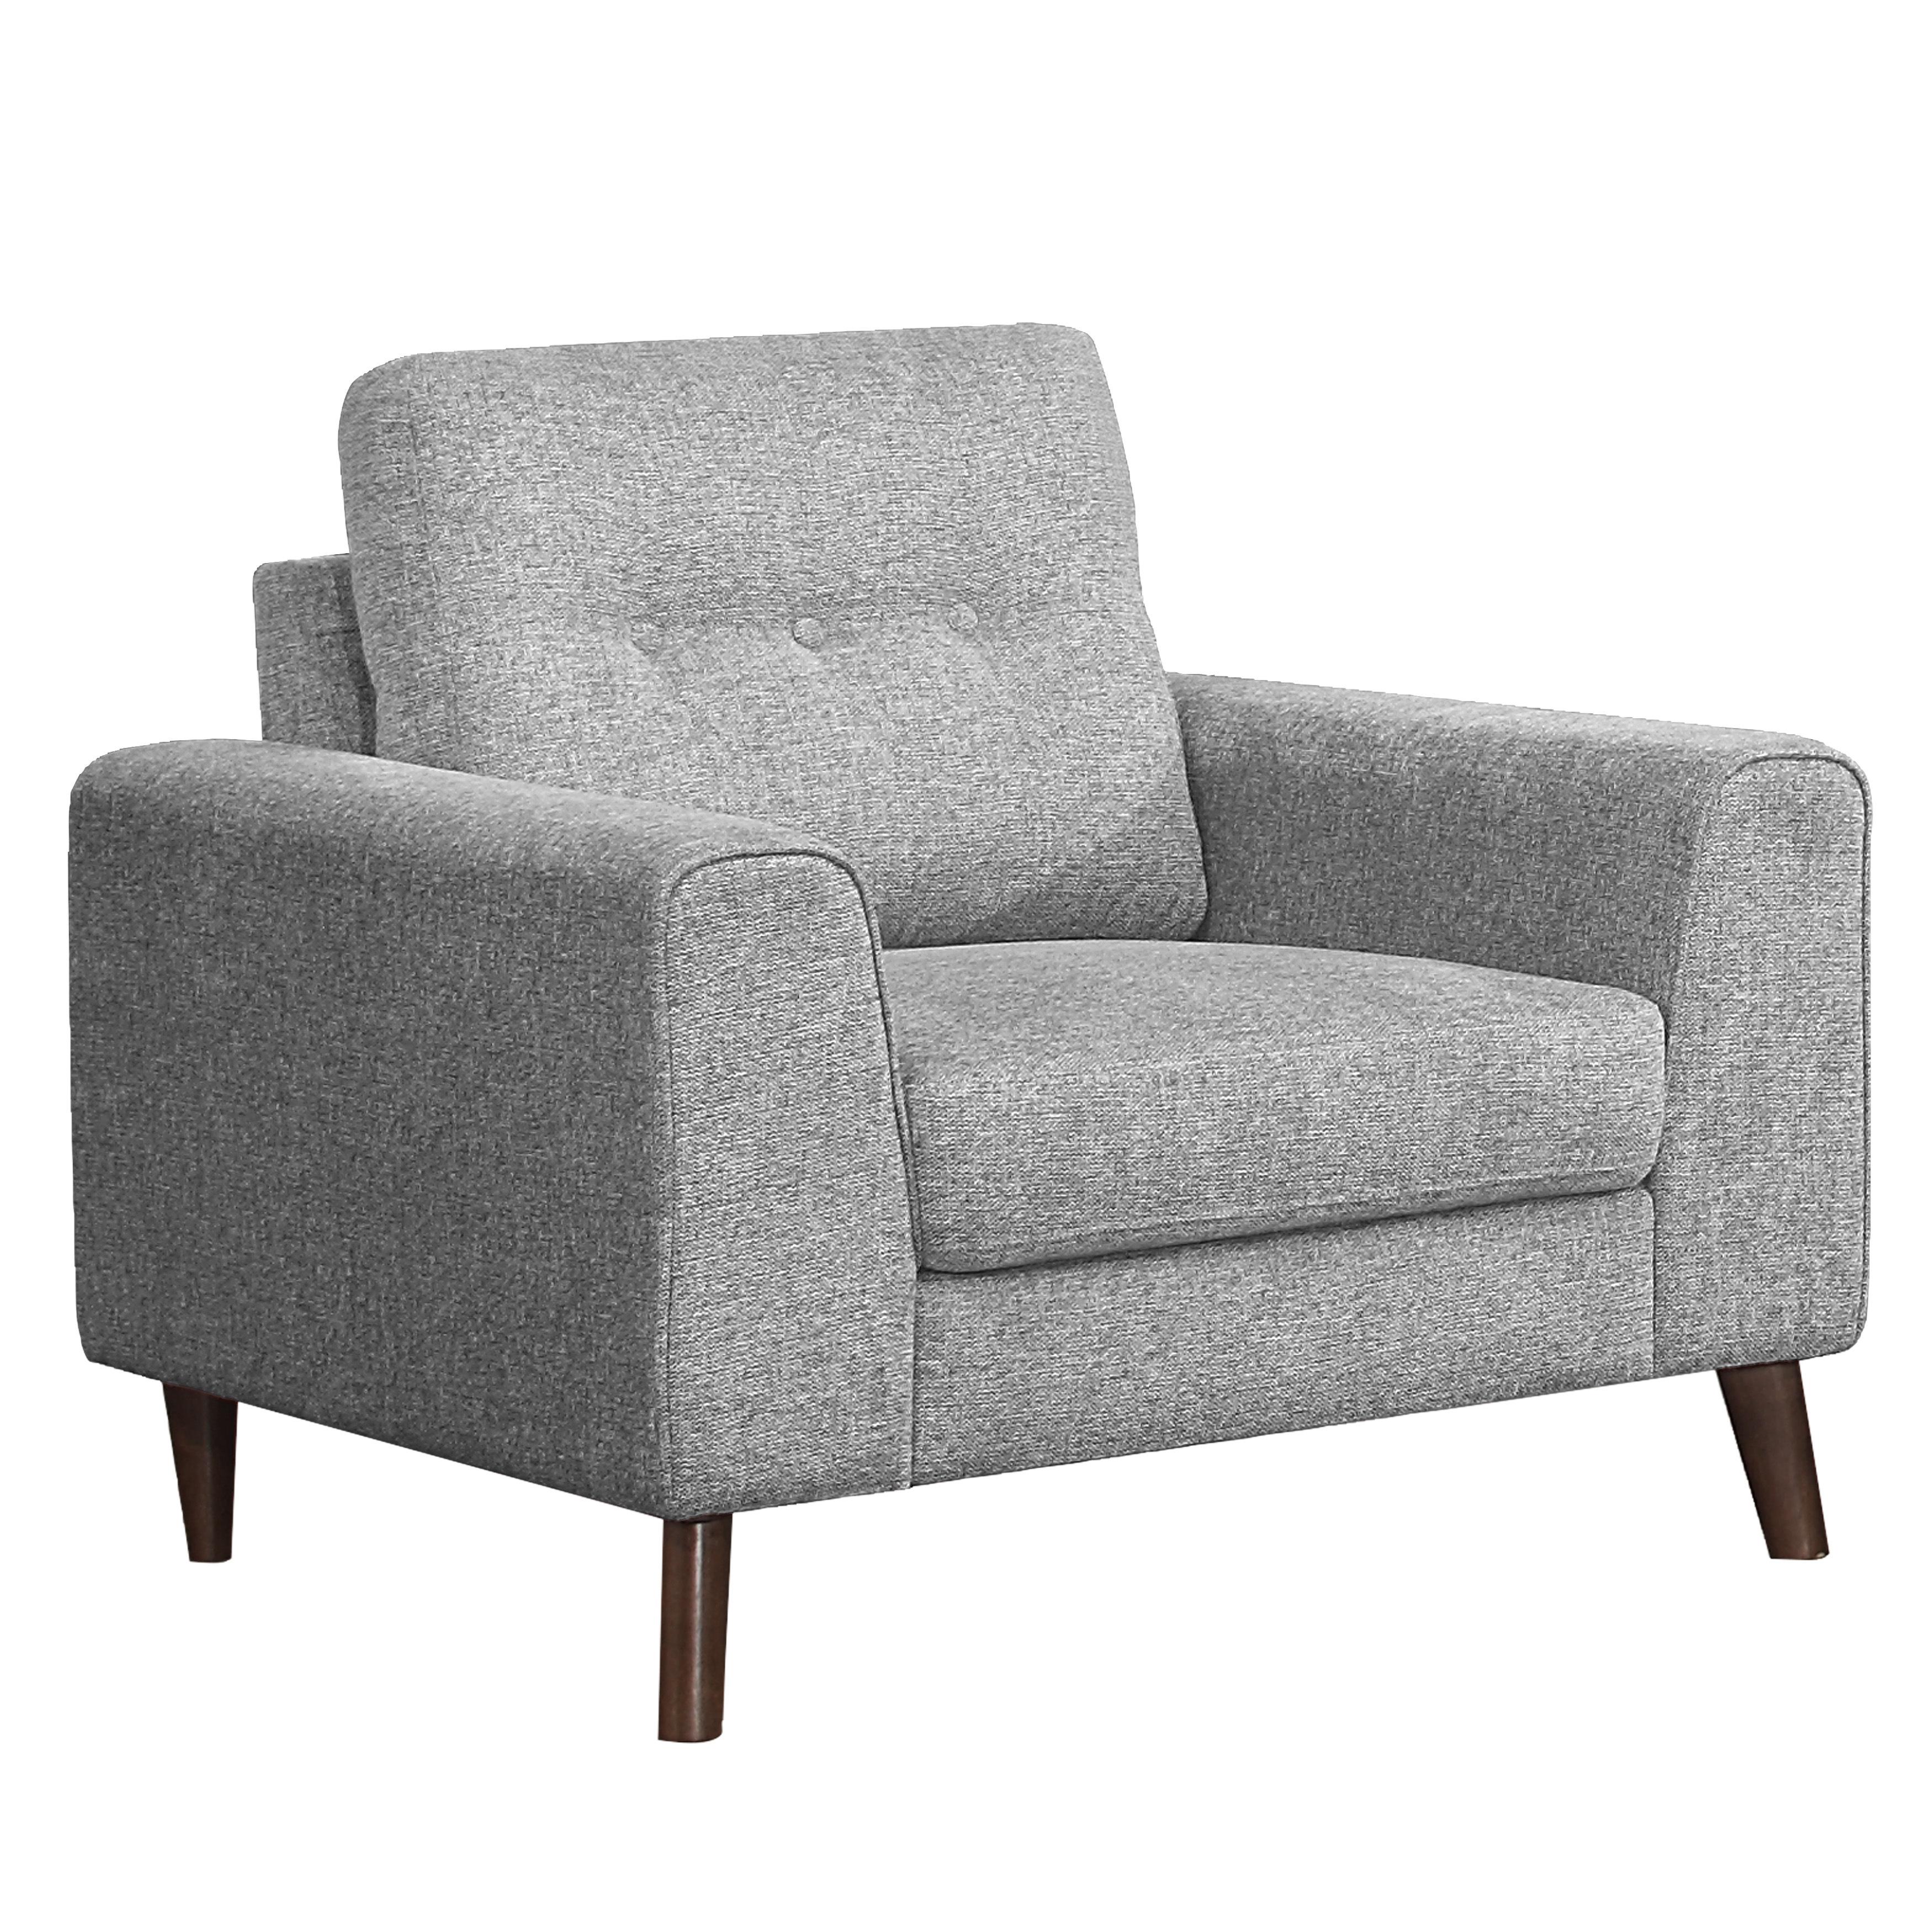 

    
Contemporary Gray Textured Arm Chair Homelegance 9300GY-1 Alexia
